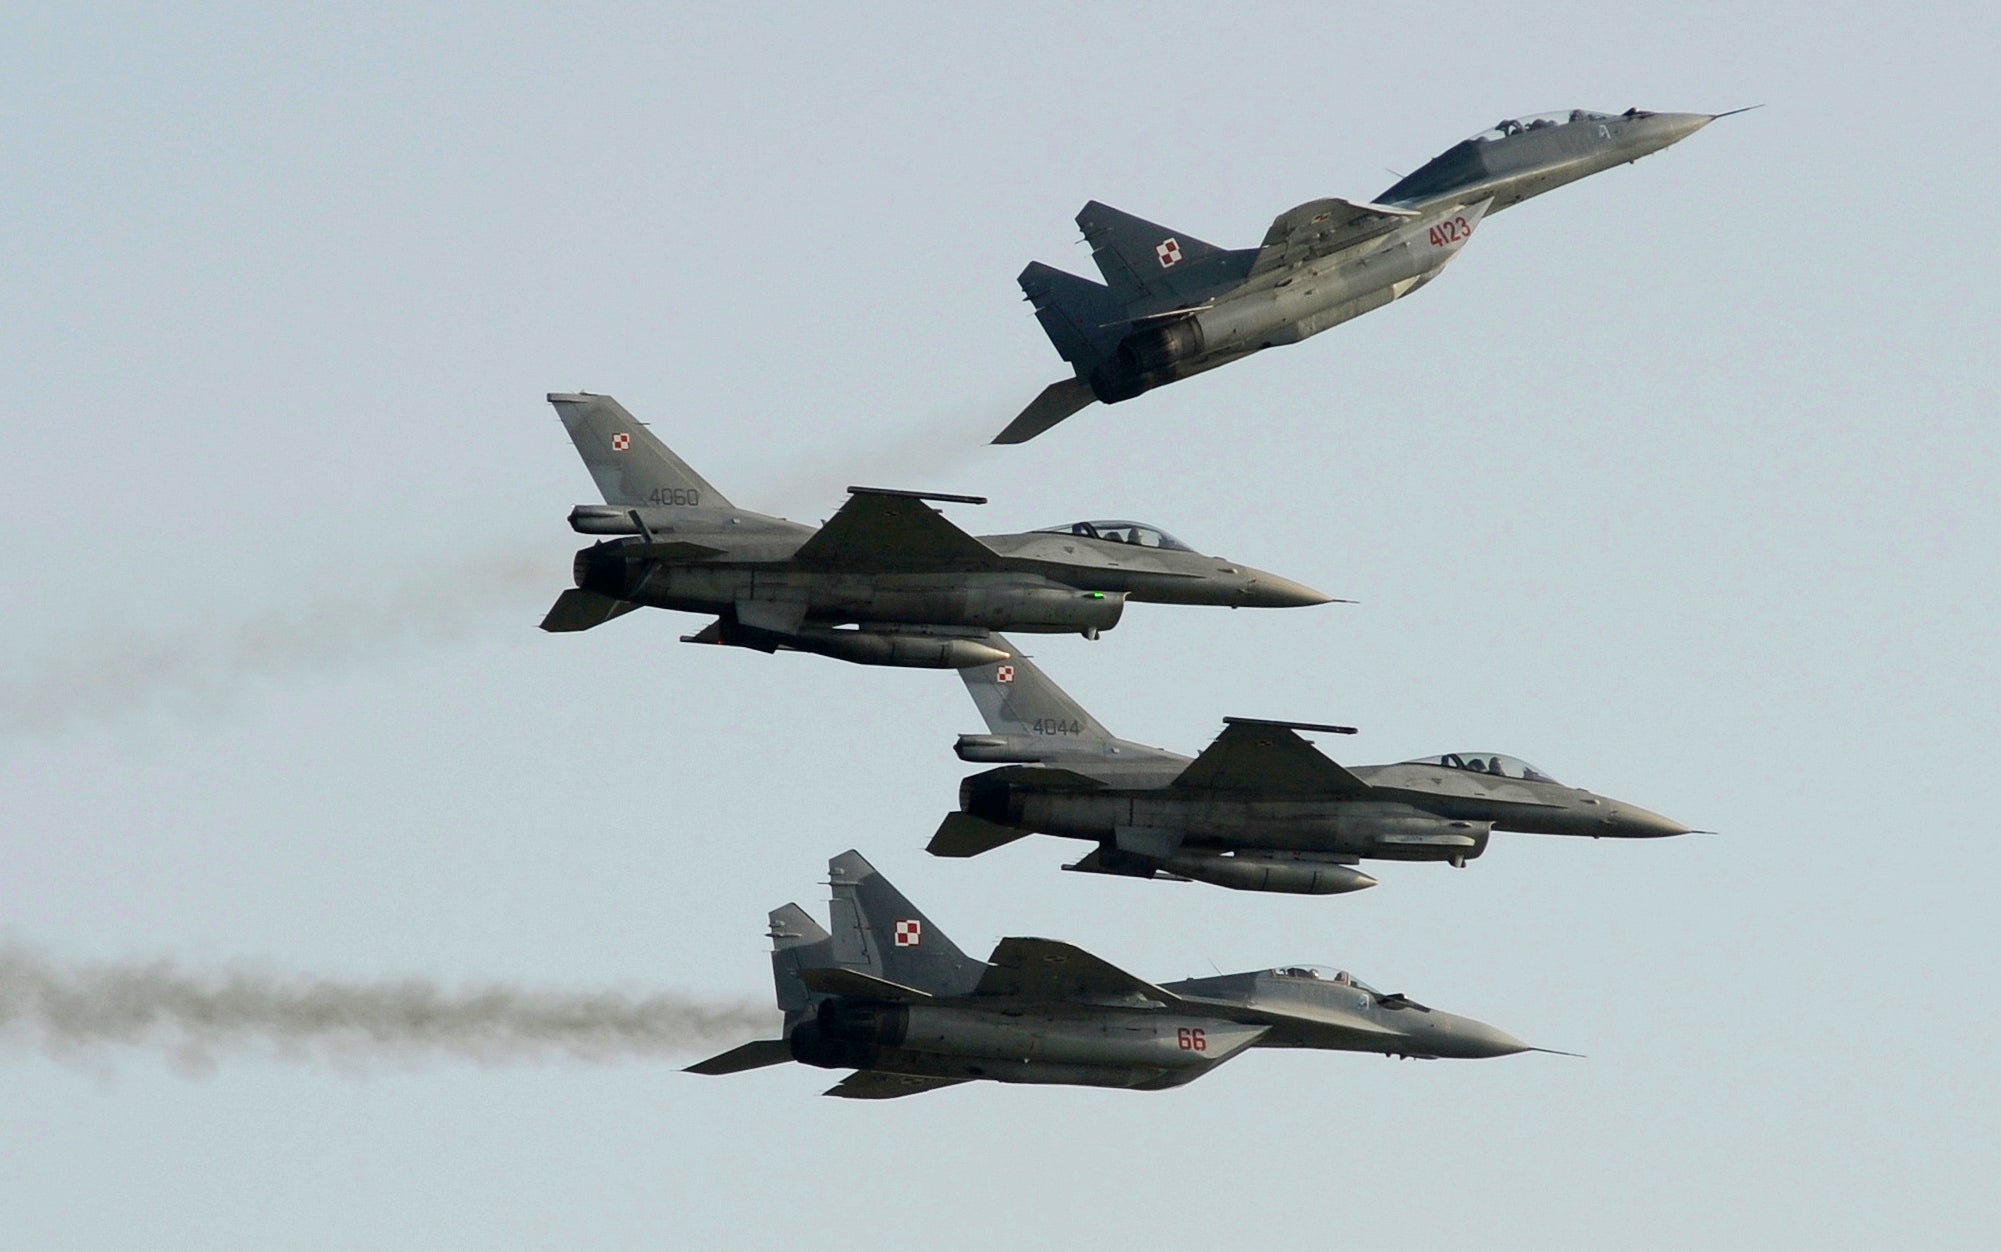 Two Russian-made MiG-29s fly above and below two US-made F-16 fighter jets during a Polish air show